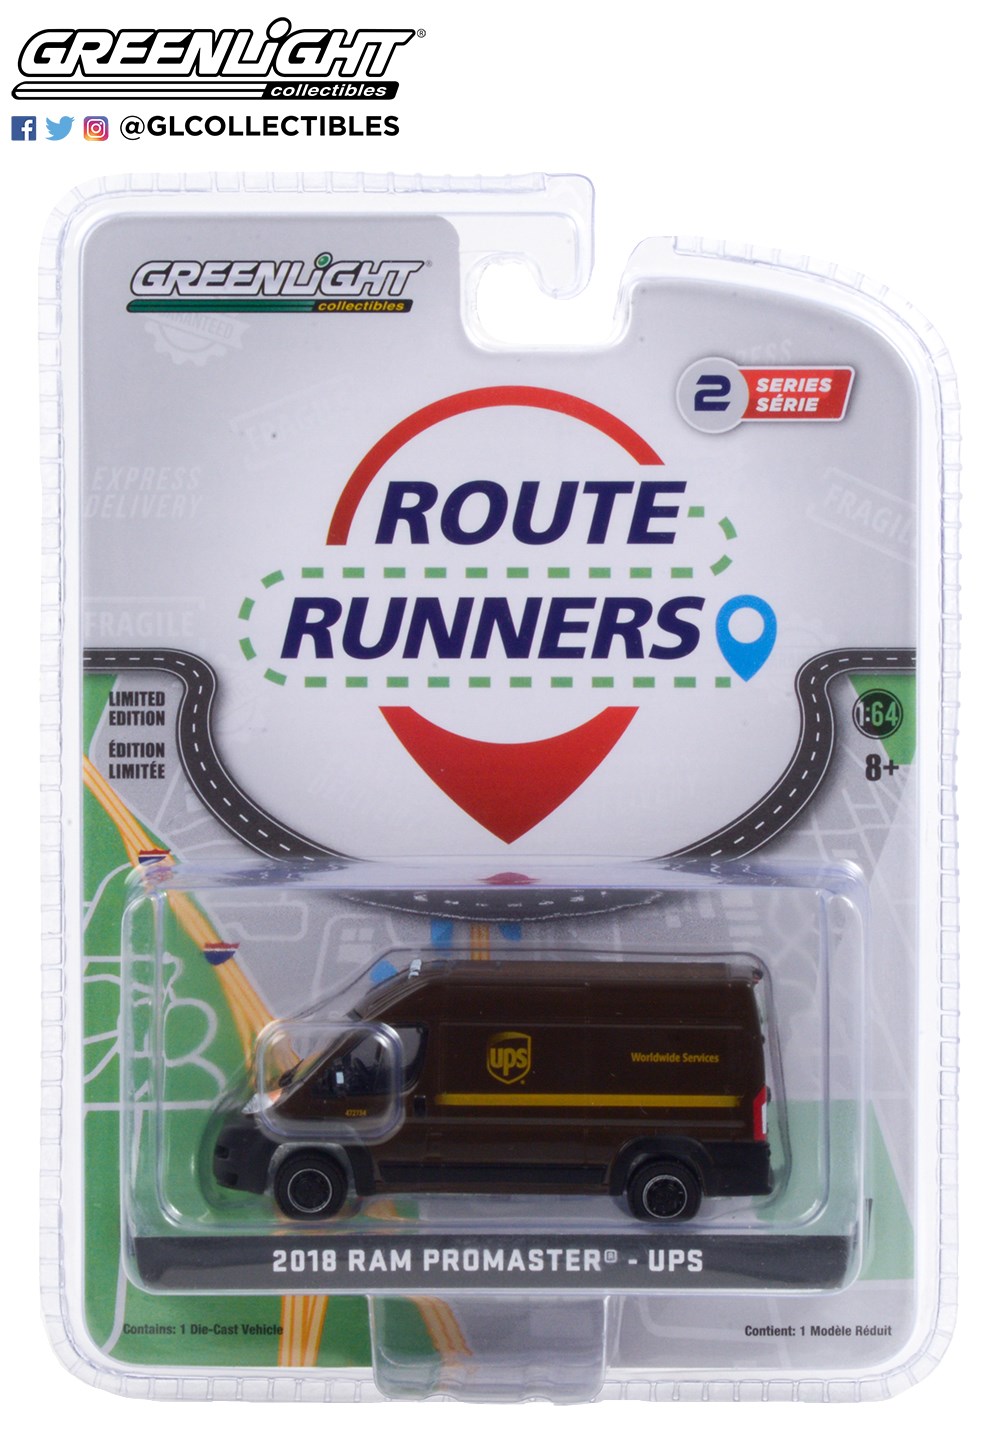 Route Runners Series 2 greenlight